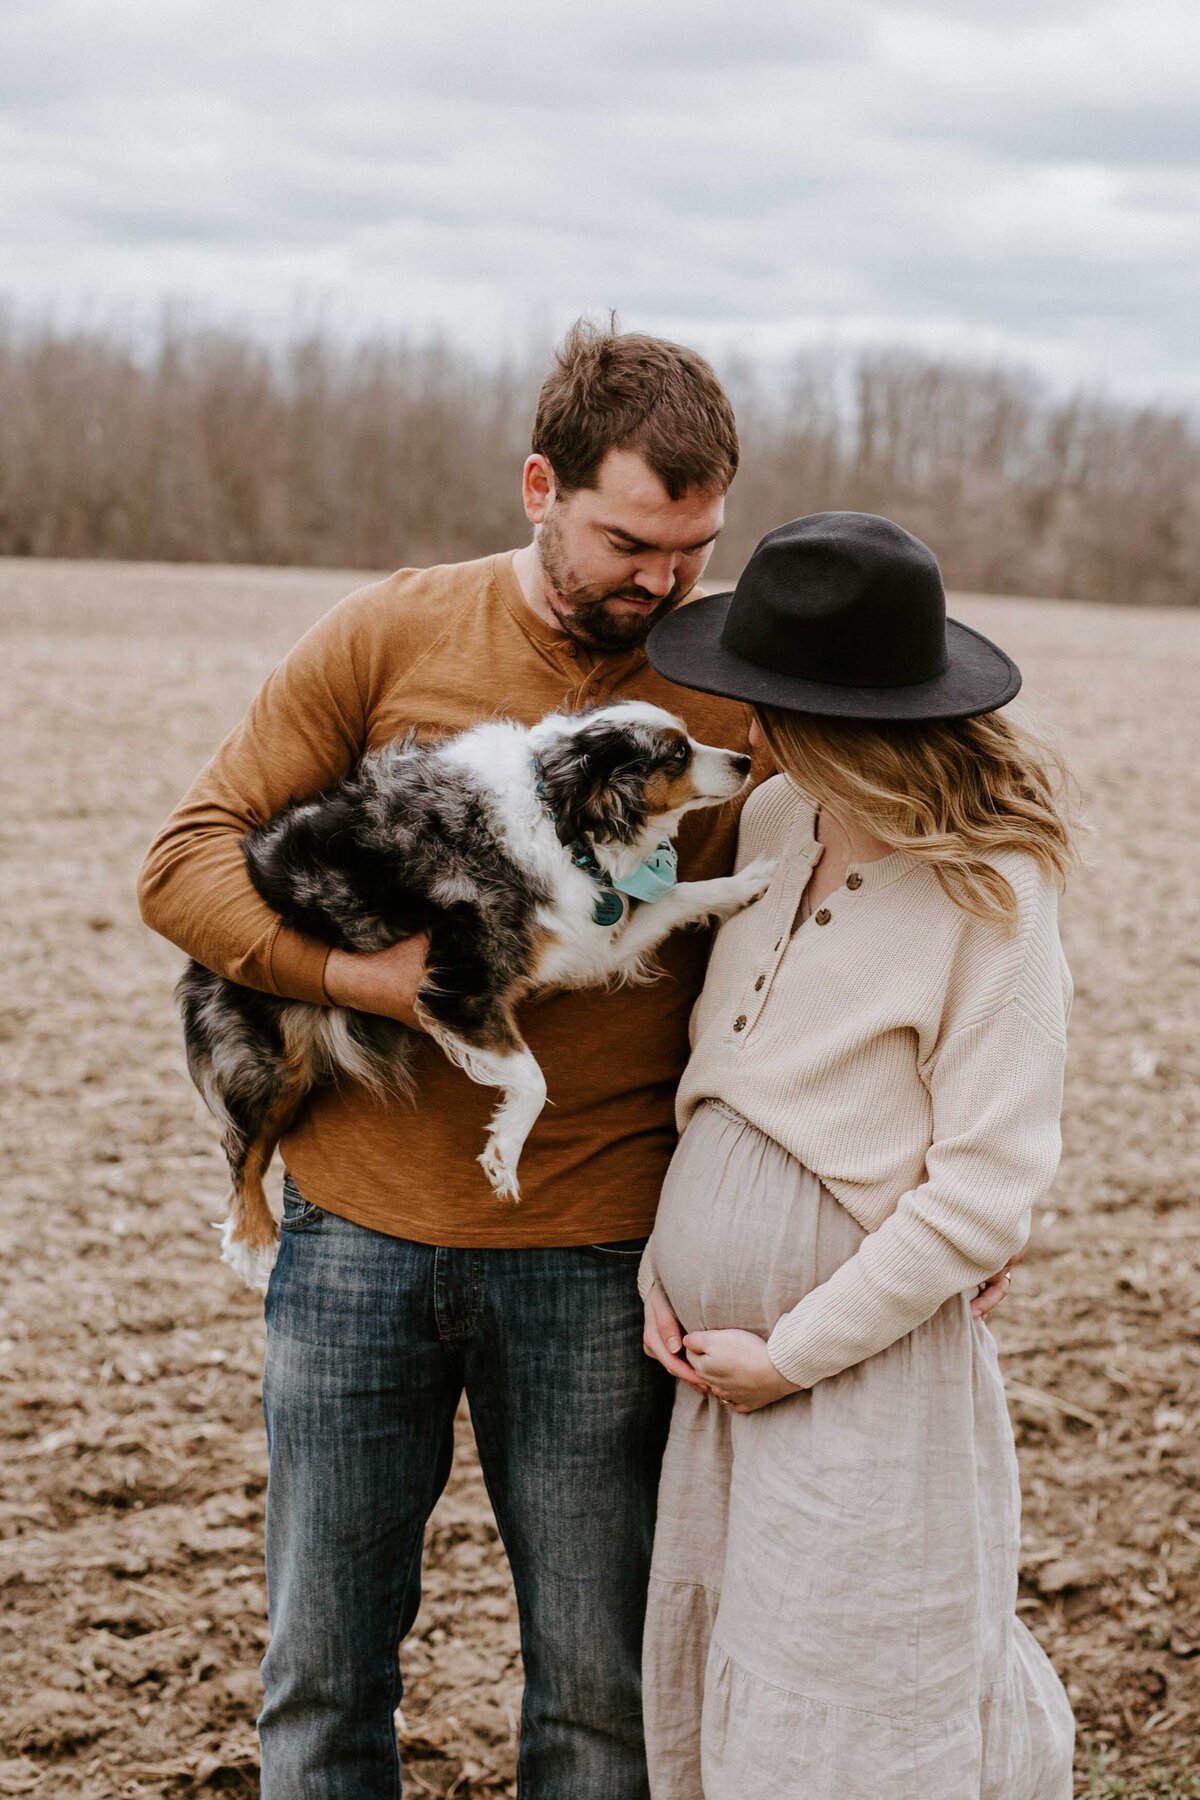 Expectant mom, dad, and pup in plowed Exeter, Ontario farmer's field for maternity photoshoot. Mom is holding her baby bump and dad is holding the dog. The pup is pawing at mom, their noses touching. Dad is looking at mom.